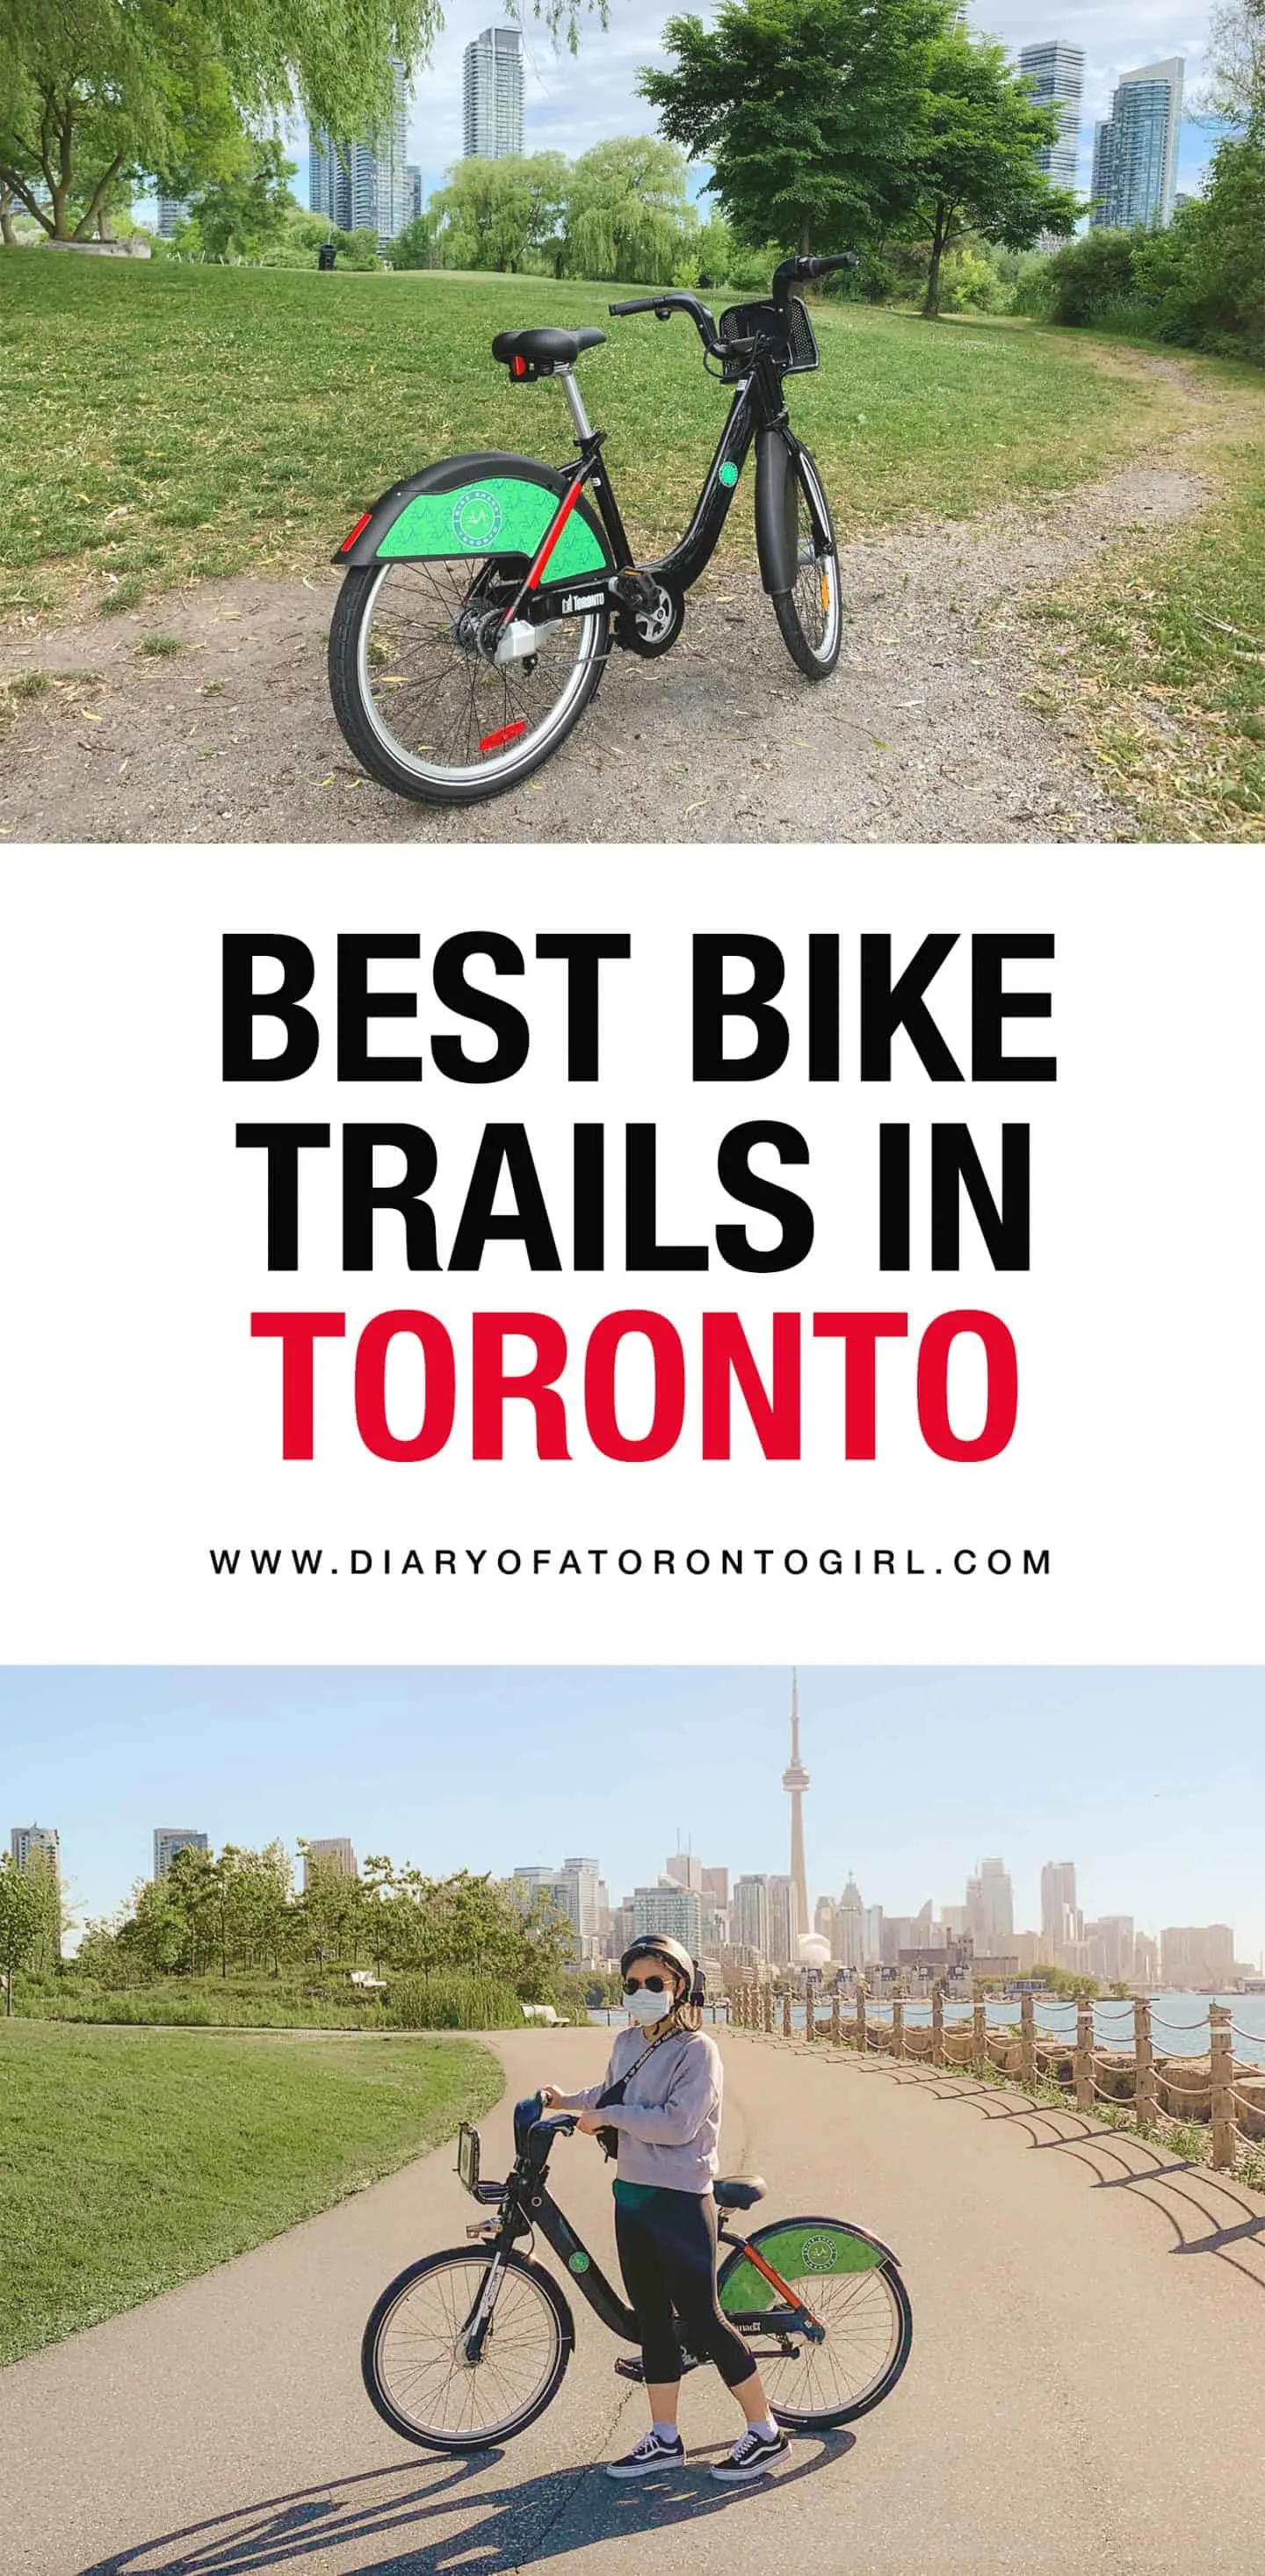 The best bike trails in Toronto whether you're looking for scenic views or good cardio!